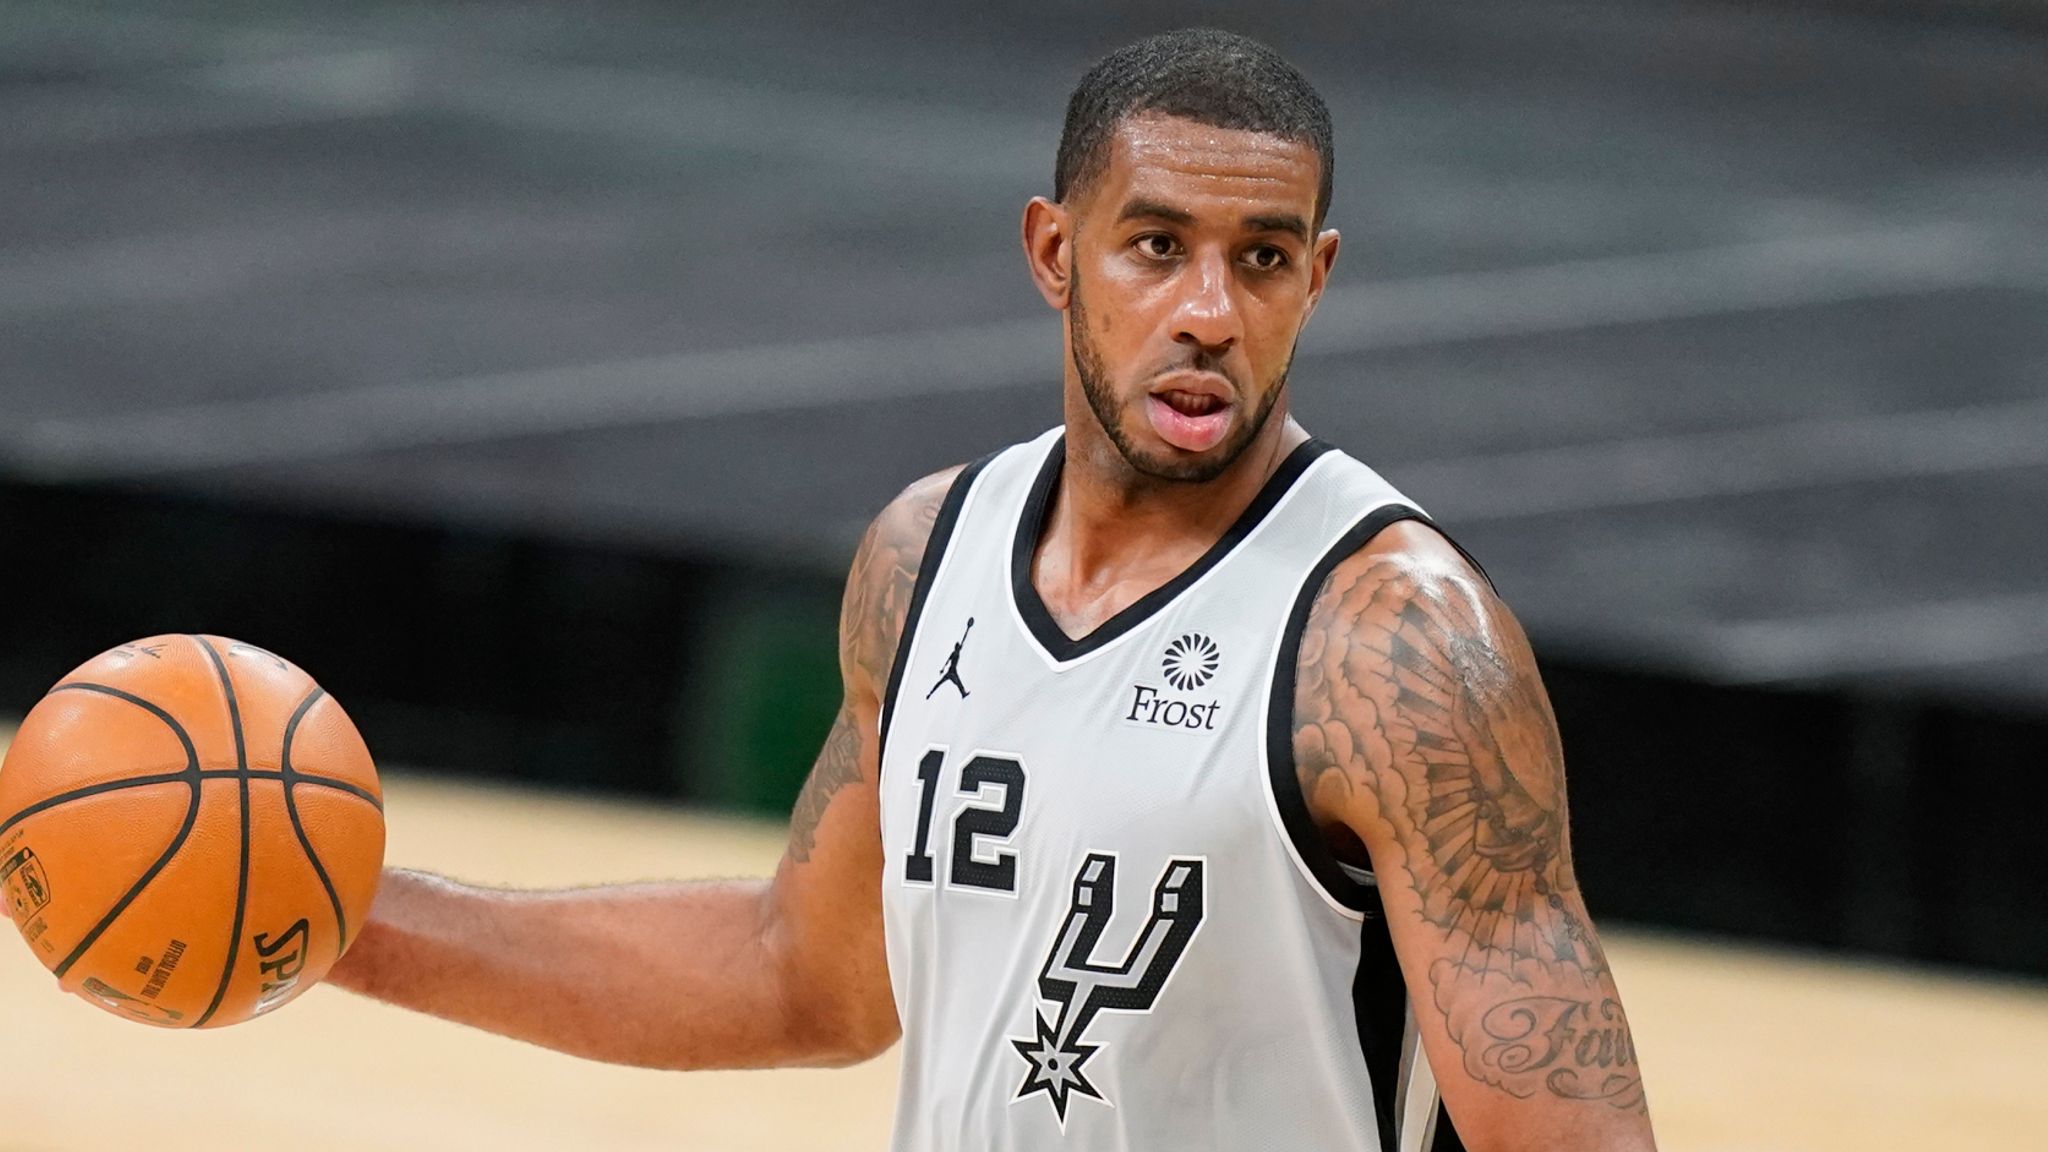 LaMarcus Aldridge: Seven-time NBA All-Star agrees to part ways